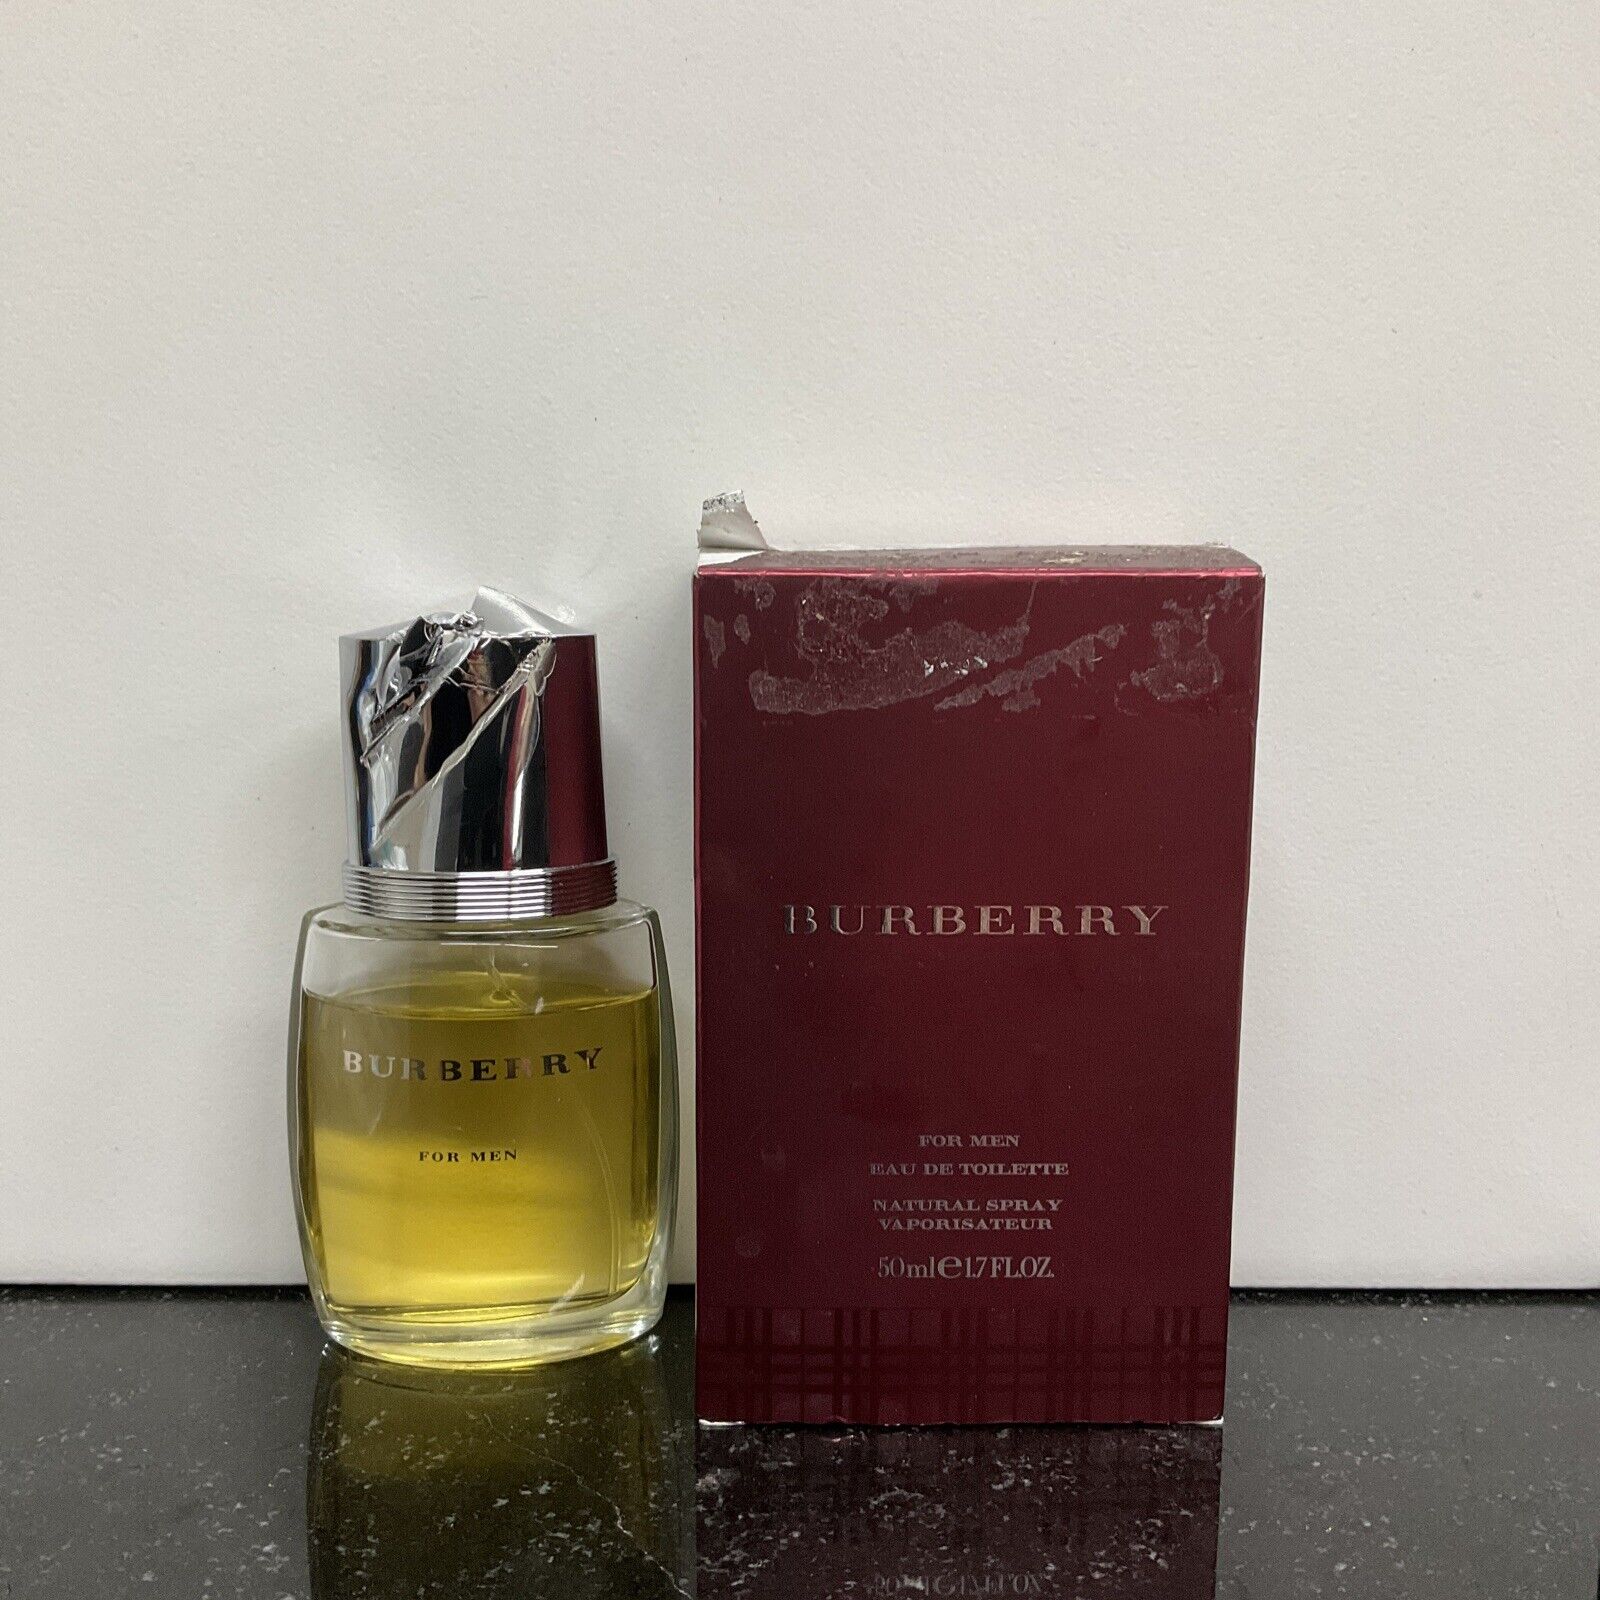 Burberry London Classic by Burberry 1.7FLOZ/50ML EDT NIB *As Shown In Image*